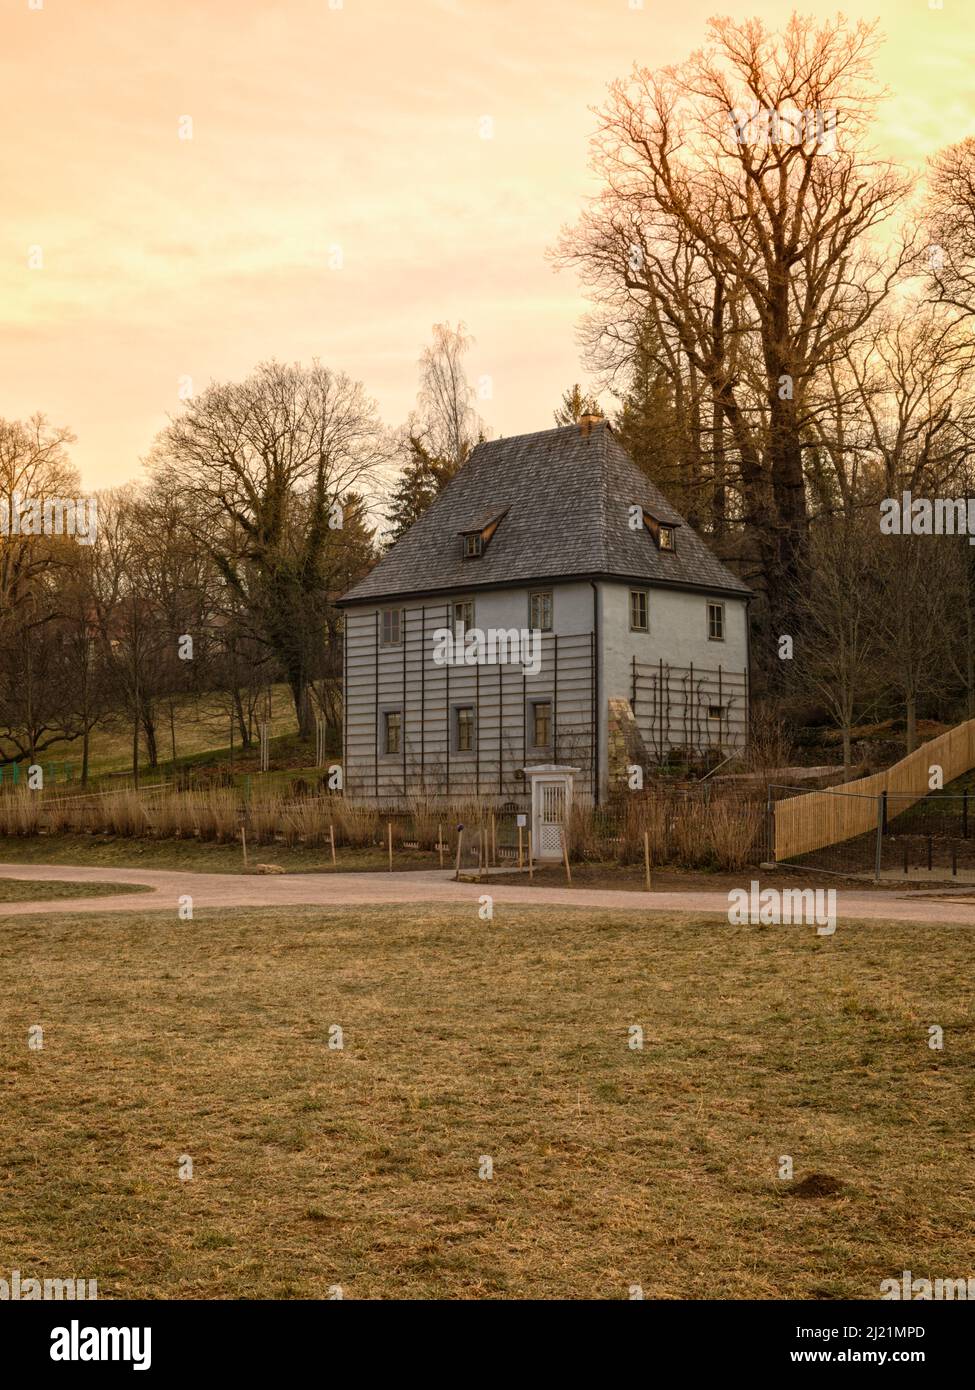 Goethe's summer house at the Park an der Ilm, Weimar, Thuringia, Germany Stock Photo